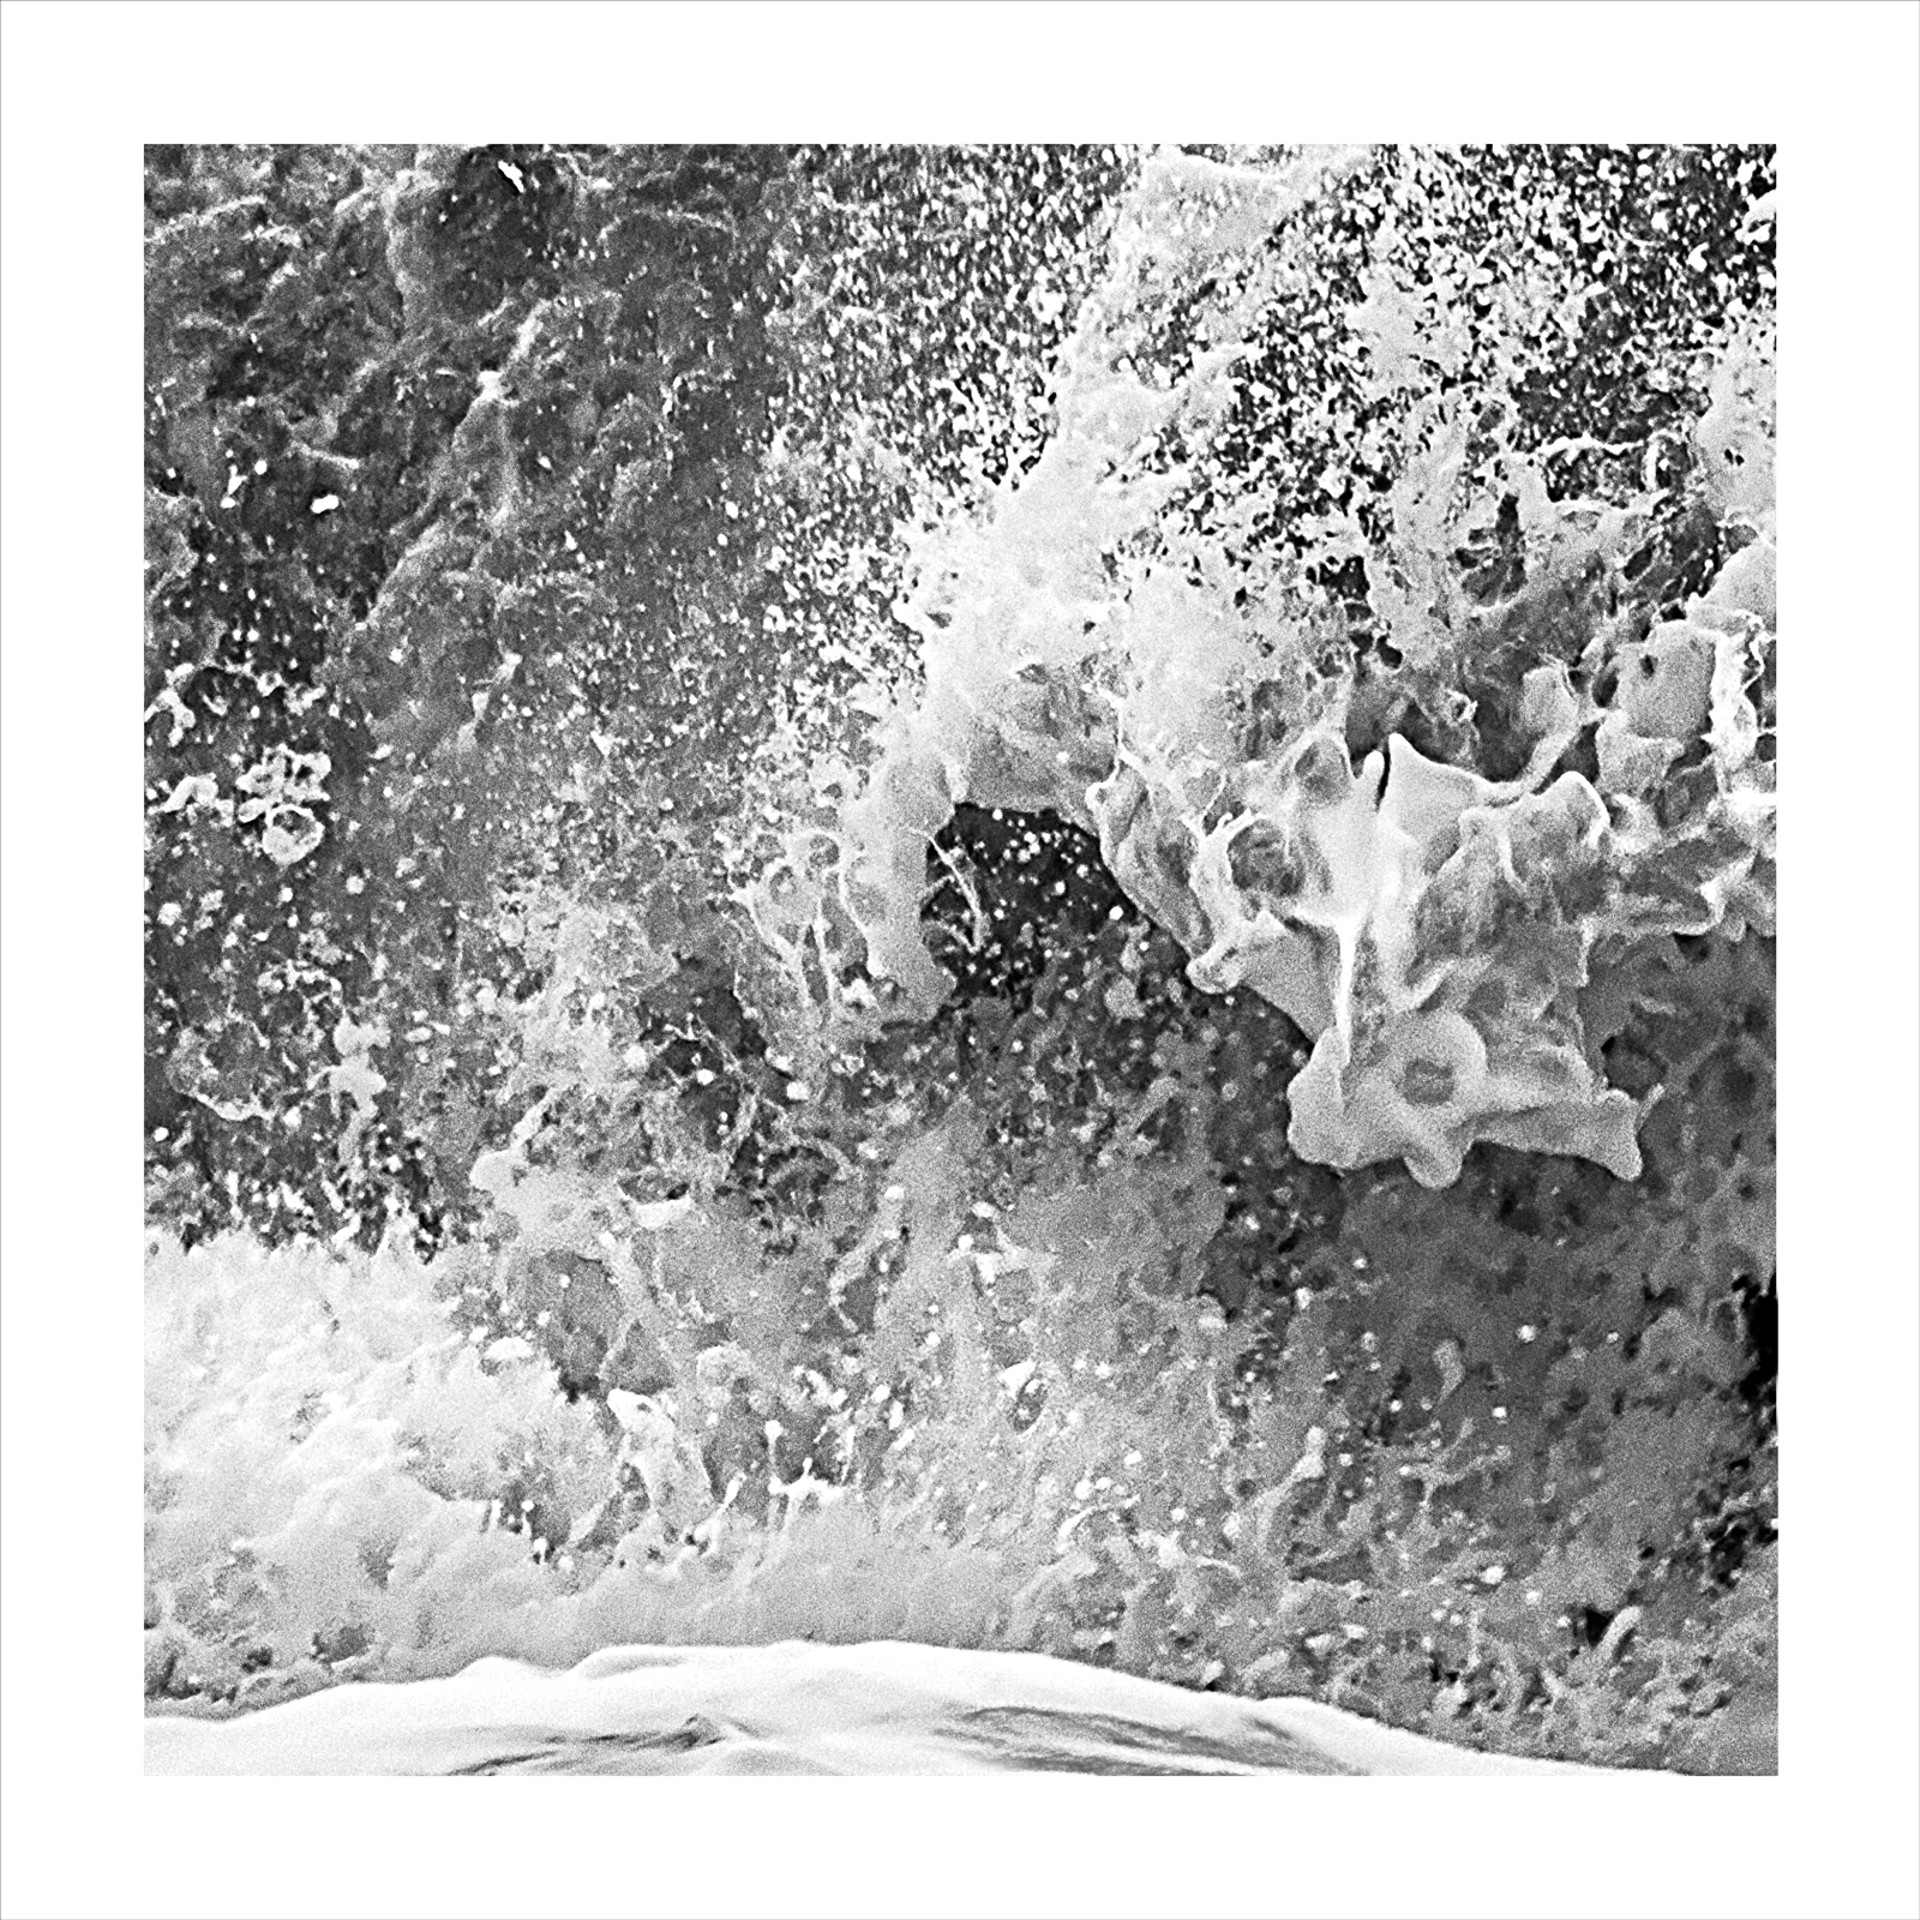 Force Of Nature- 5S5A7490 Crop 2  (Three inch border-white frame) by Bob Tabor